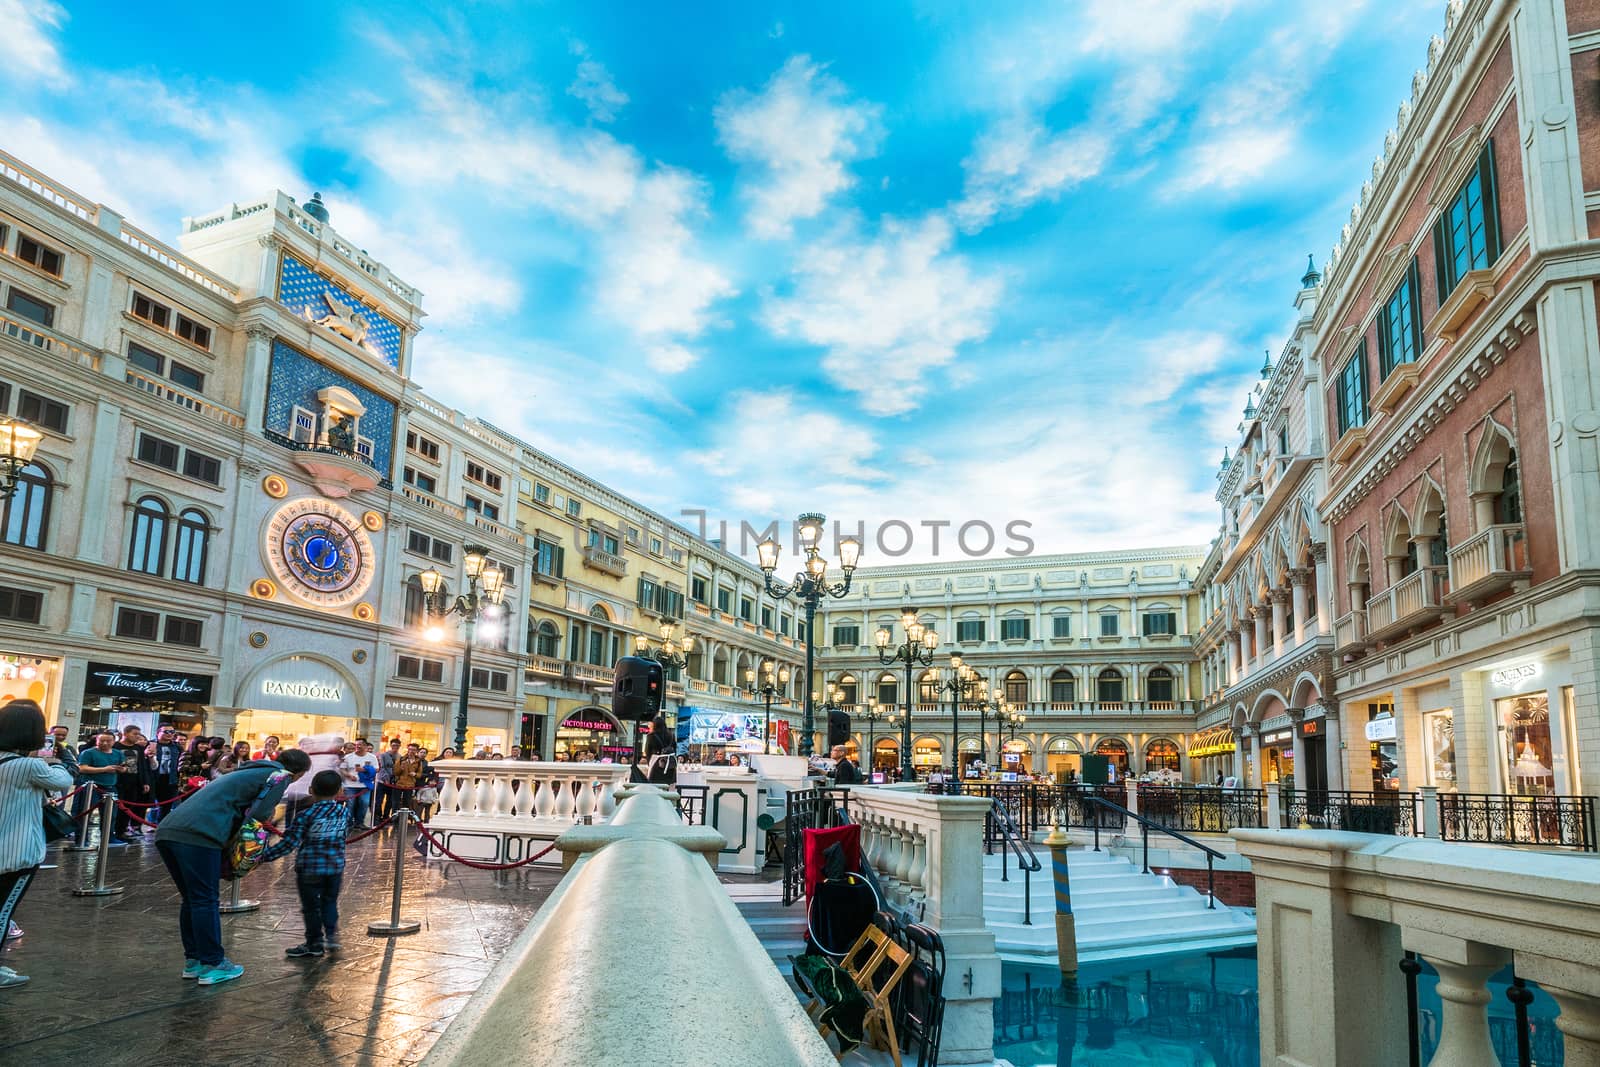 MACAU CHINA-JANUARY 11 visitor on gondola boat in Venetian Hotel The famous shopping mall luxury hotel landmark and the largest casino in the world on January 11,2016 in Macau China